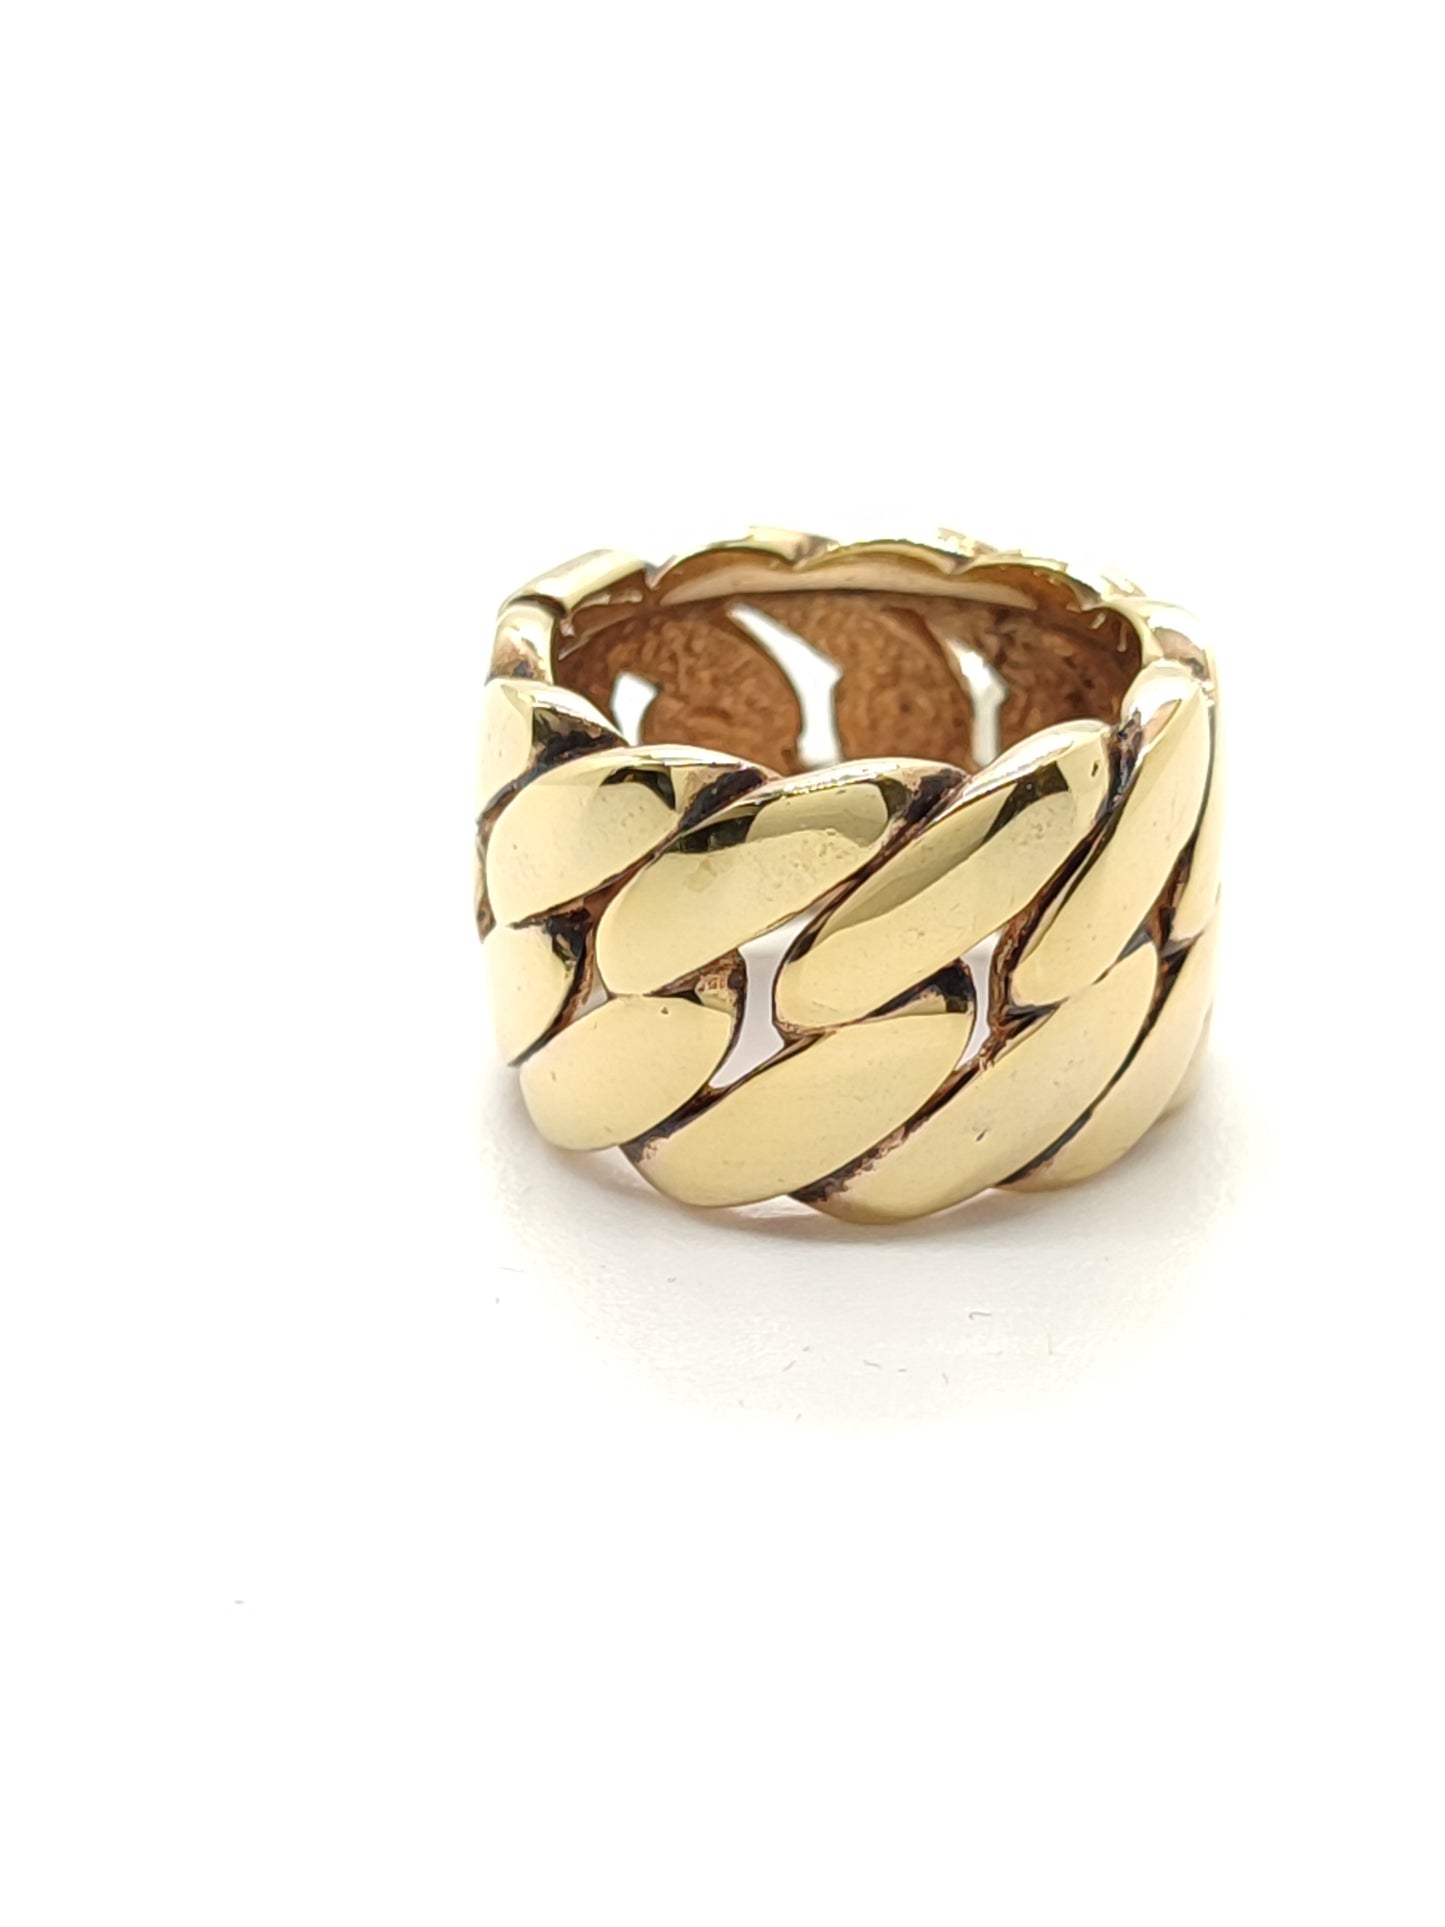 Groumette ring in yellow gold silver - 1.5cm